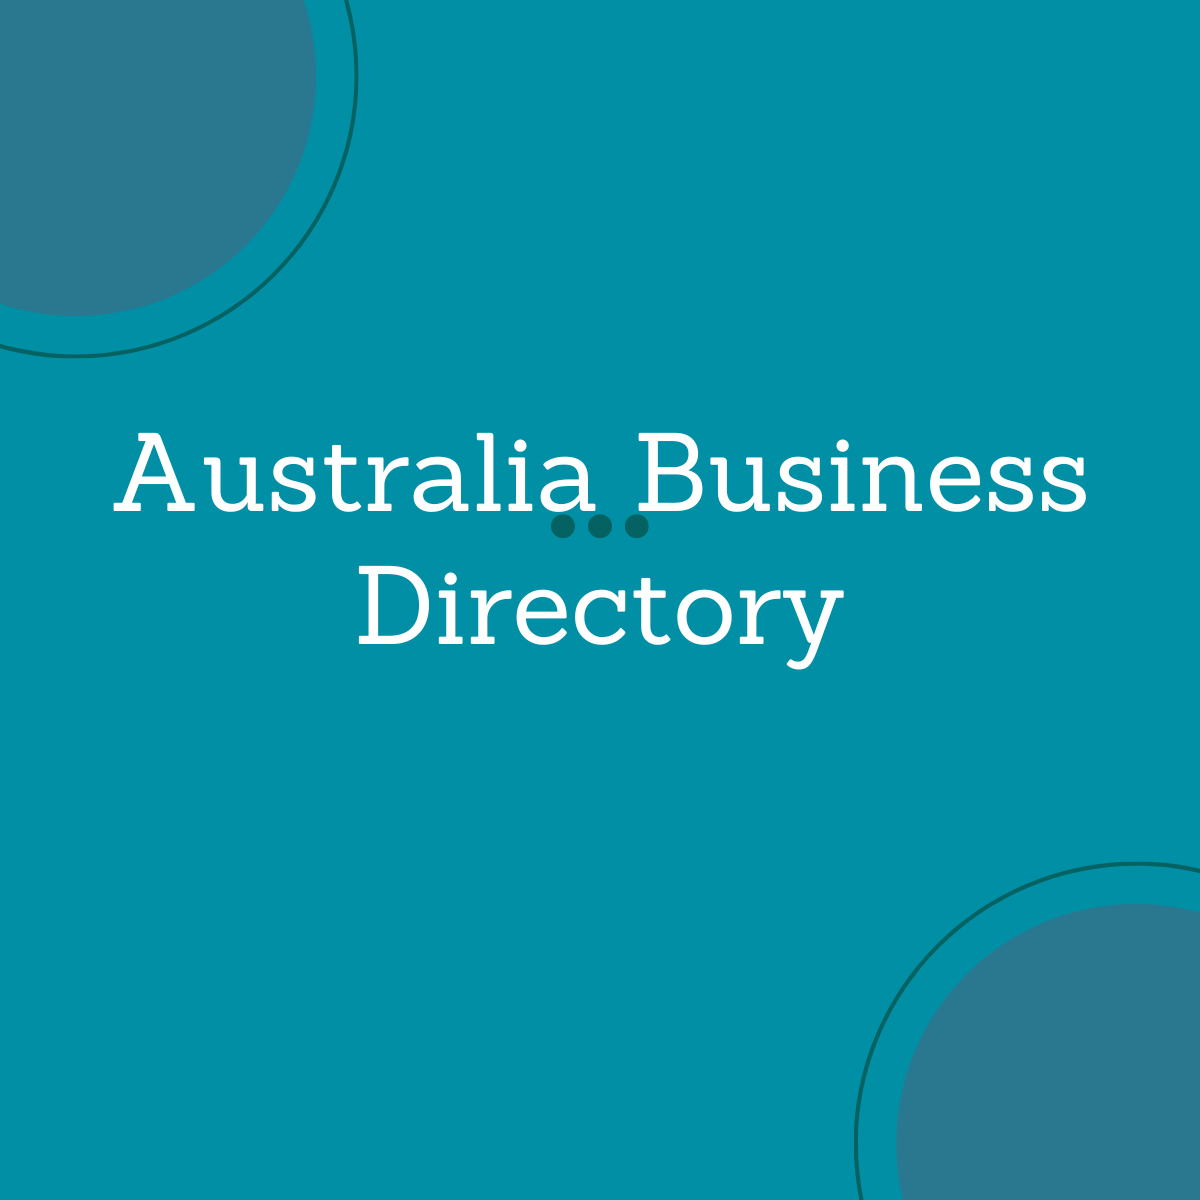 15 Active business directory & listing sites in Australia